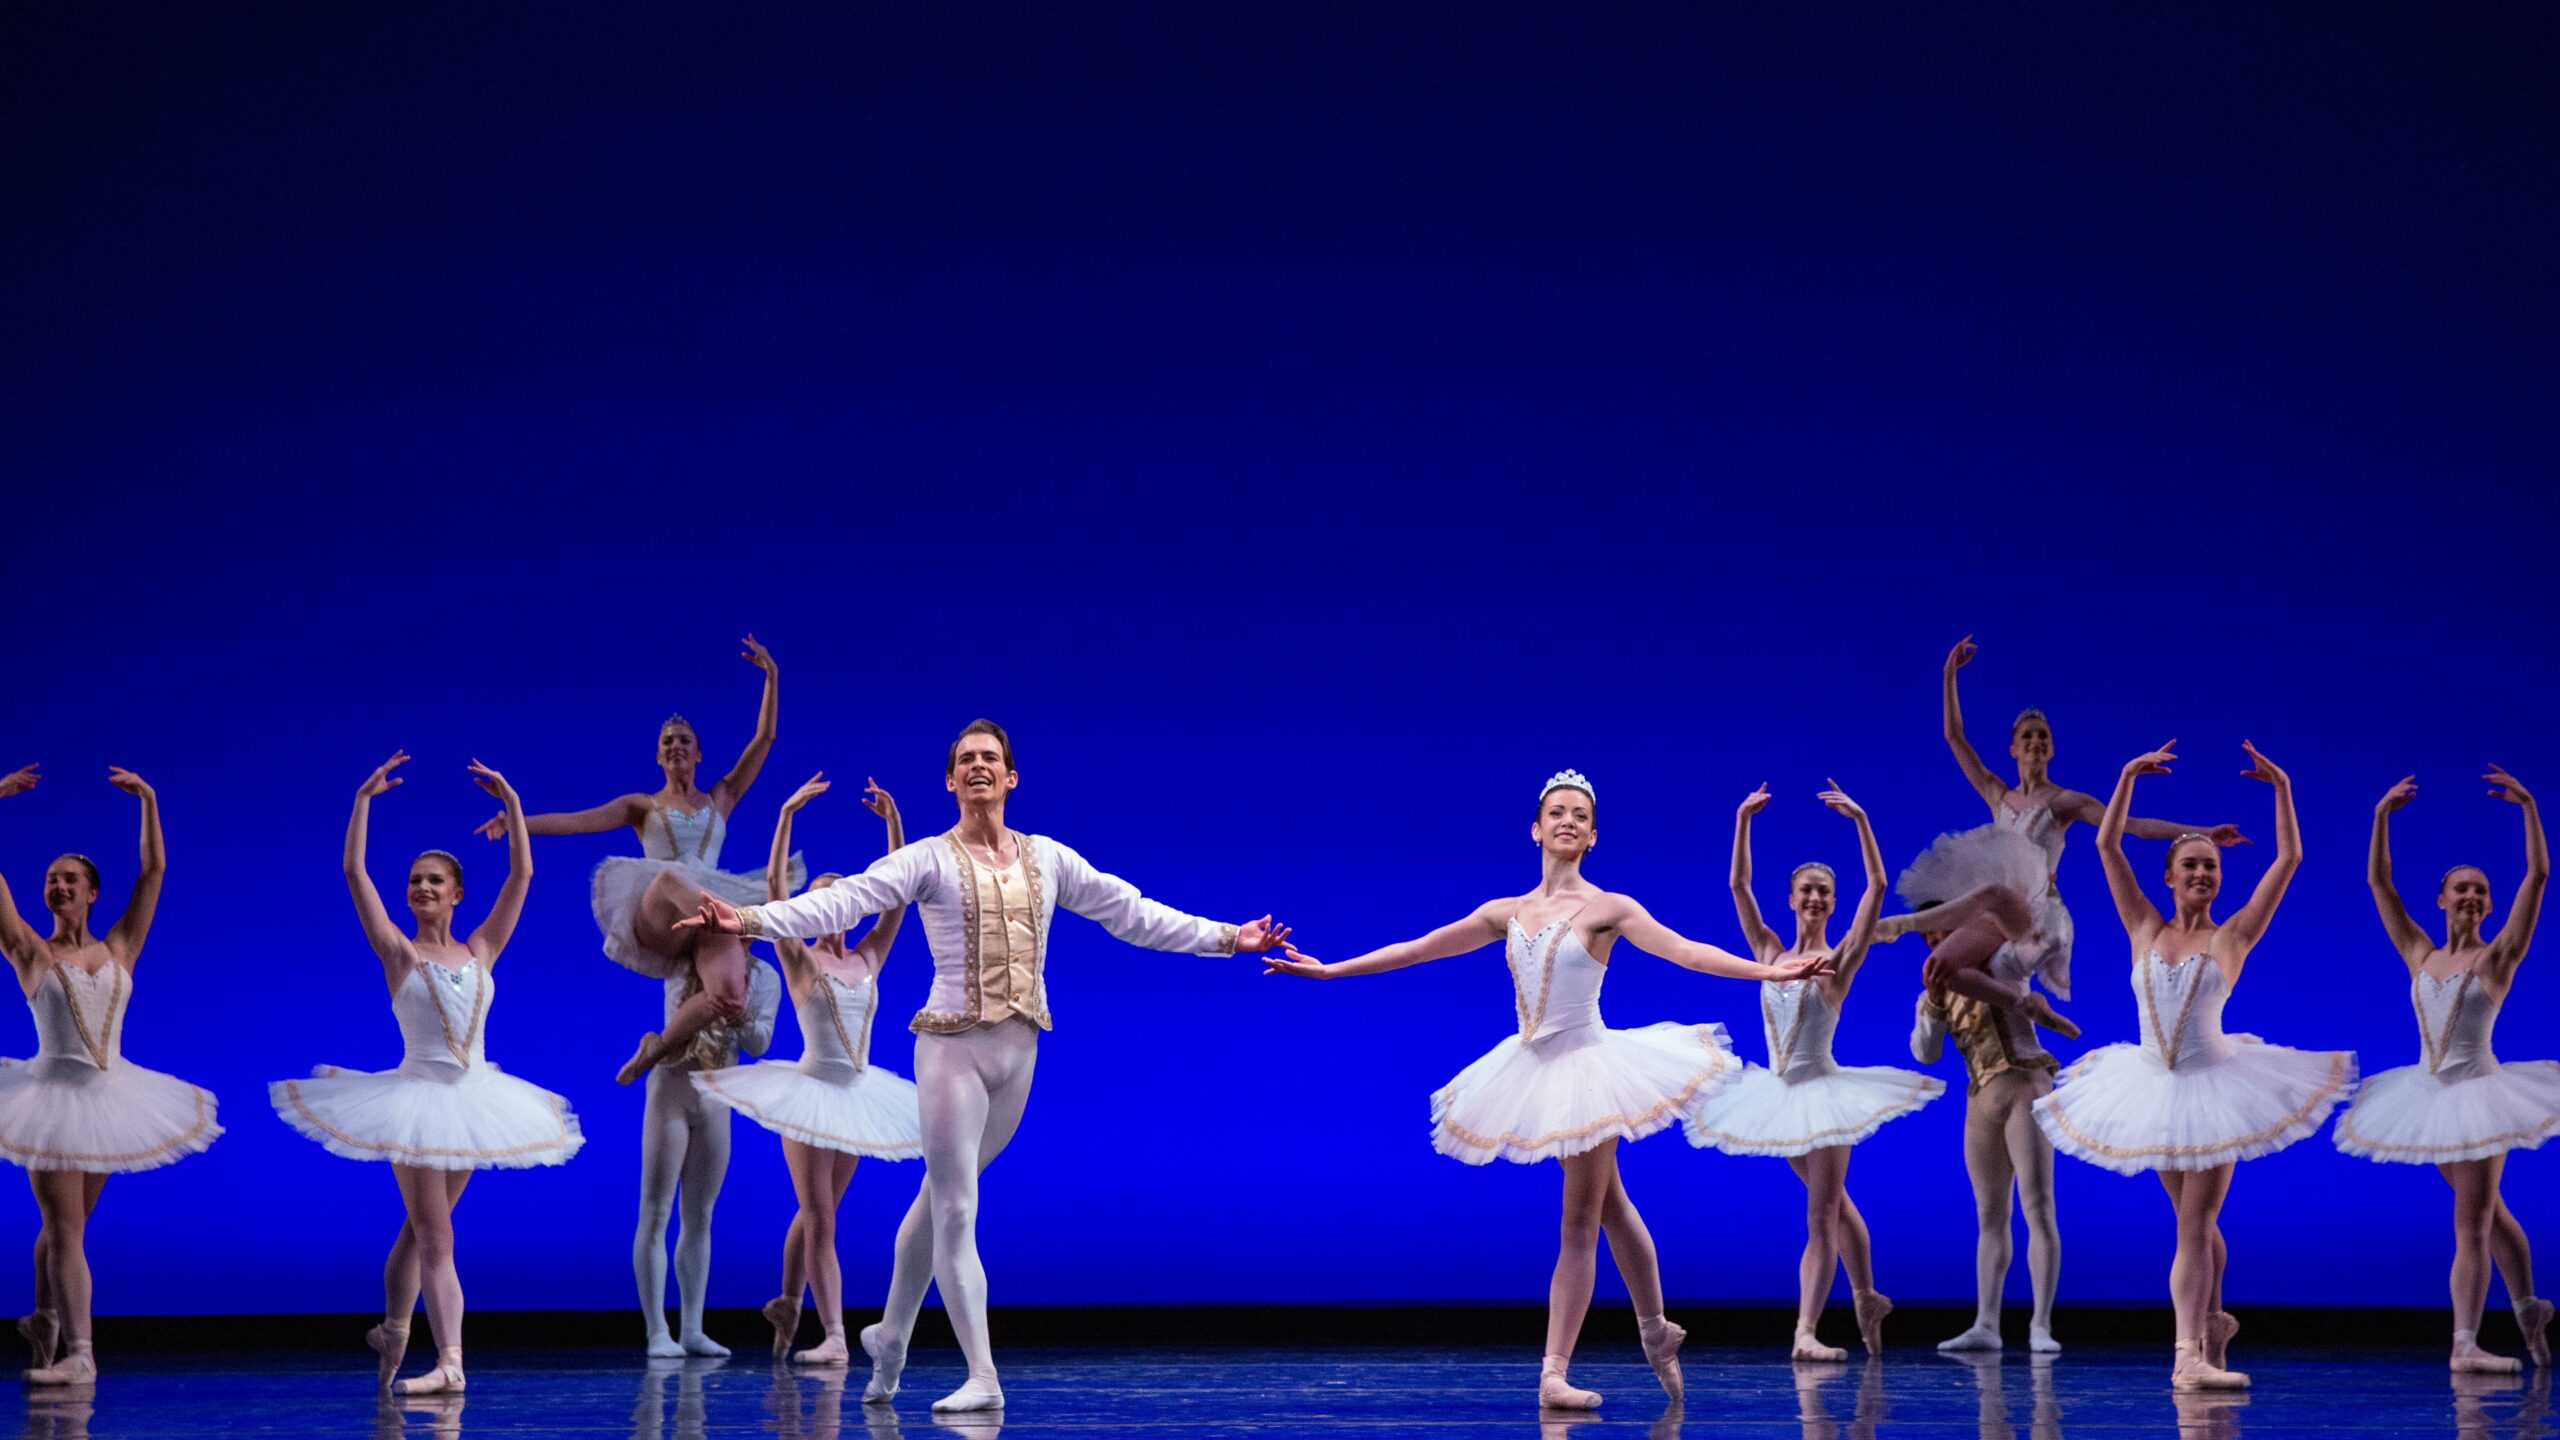 Onstage in front of a deep blue backdrop, an ensemble of dancers pose in tendu derriere en croisé, the men in white tunics and tights, and the women in white tutus.